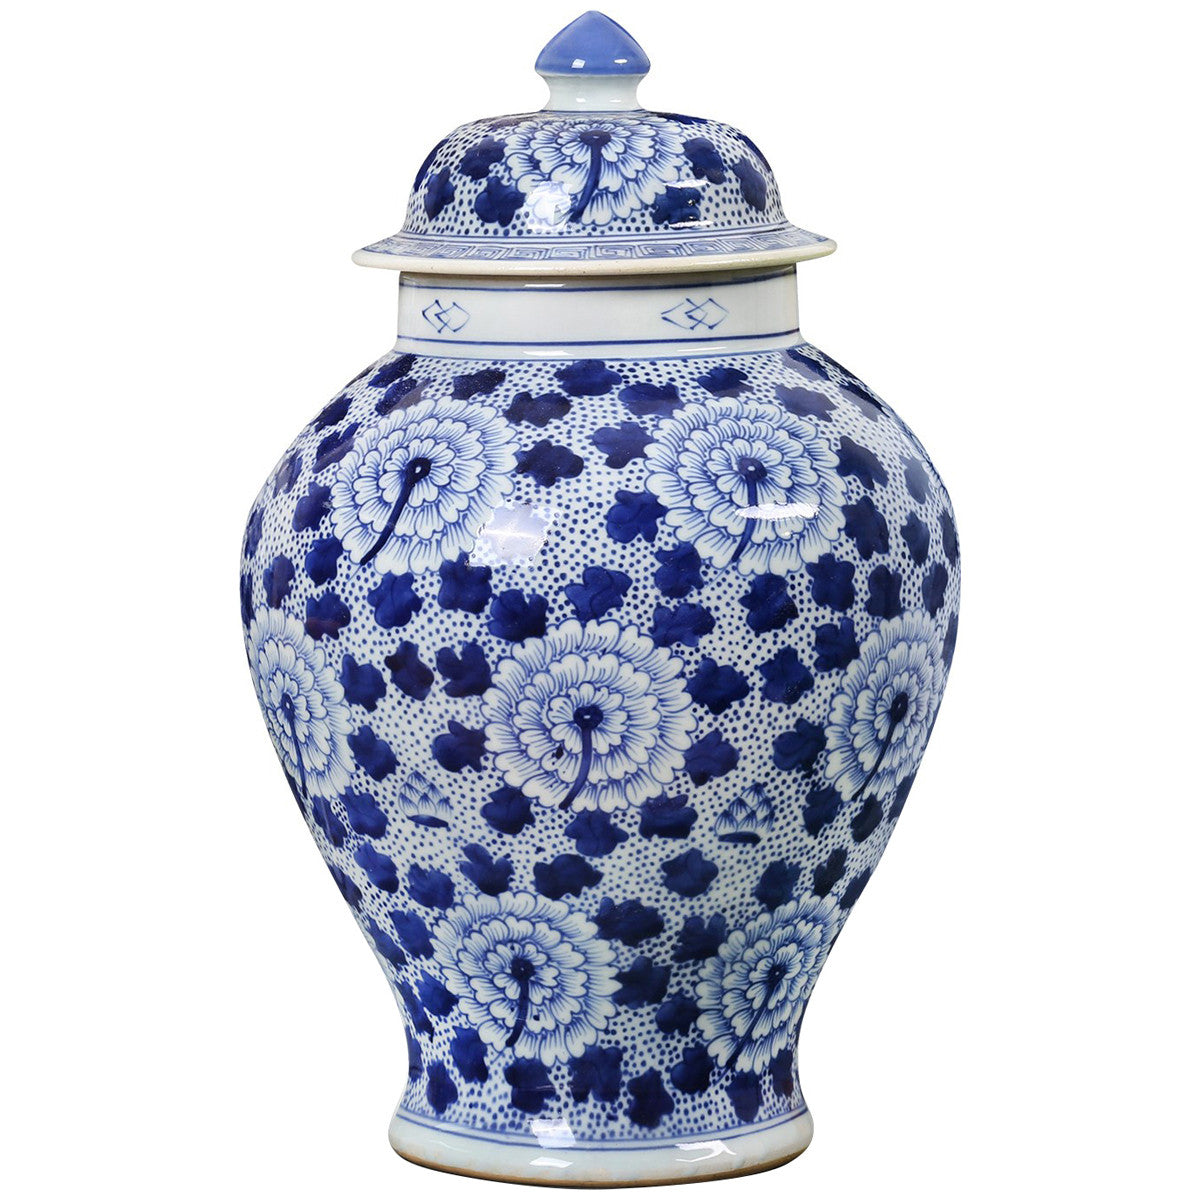 Villa & House Flower Temple Jar in Blue and White